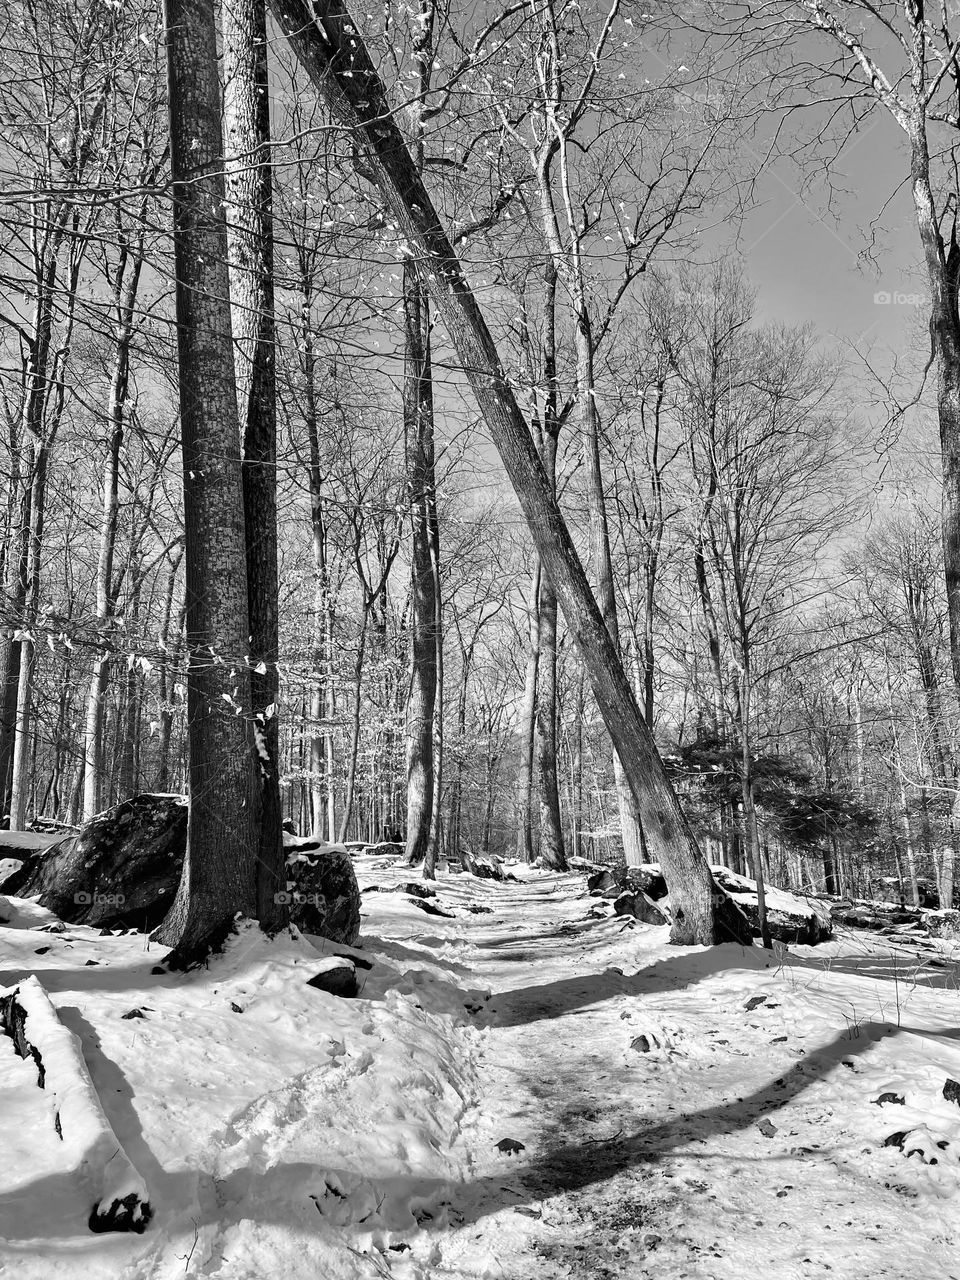 A snow covered hiking trail through the woods